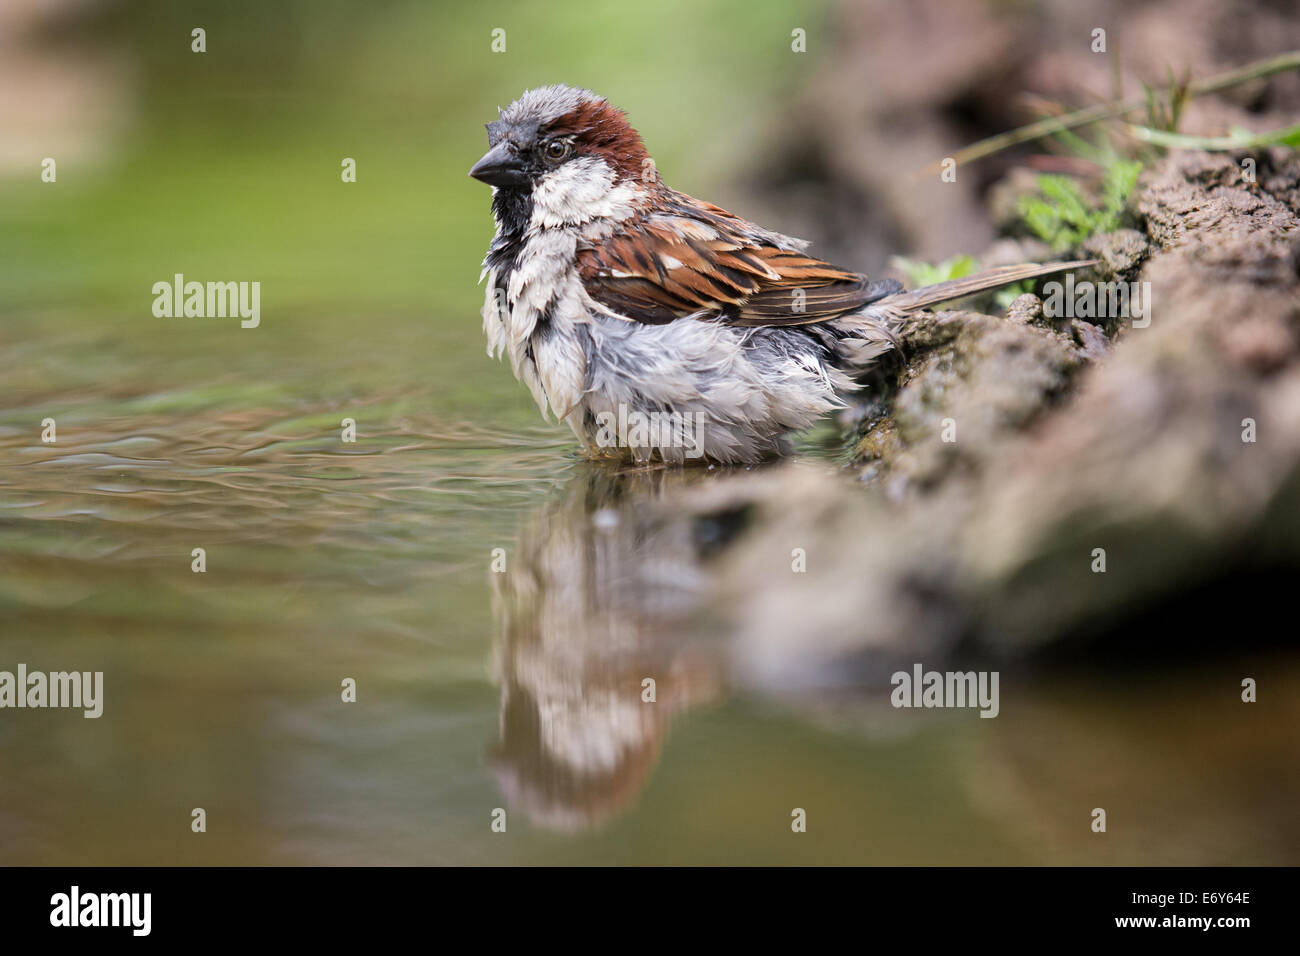 Adult male House Sparrow (Passer domesticus) bathing Stock Photo